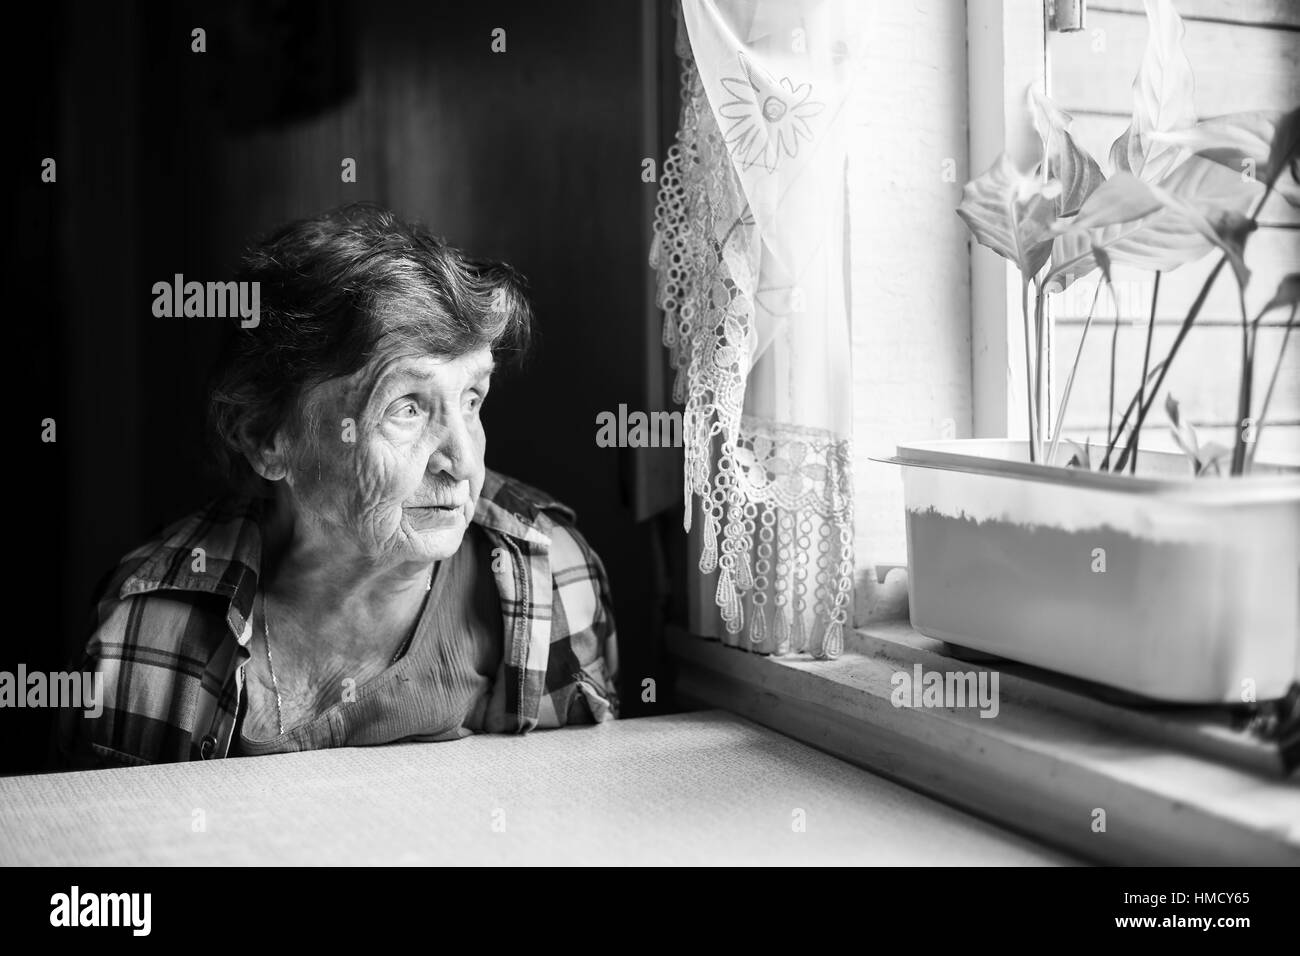 An elderly woman sadly looking out the window. Black-and-white photo. Stock Photo